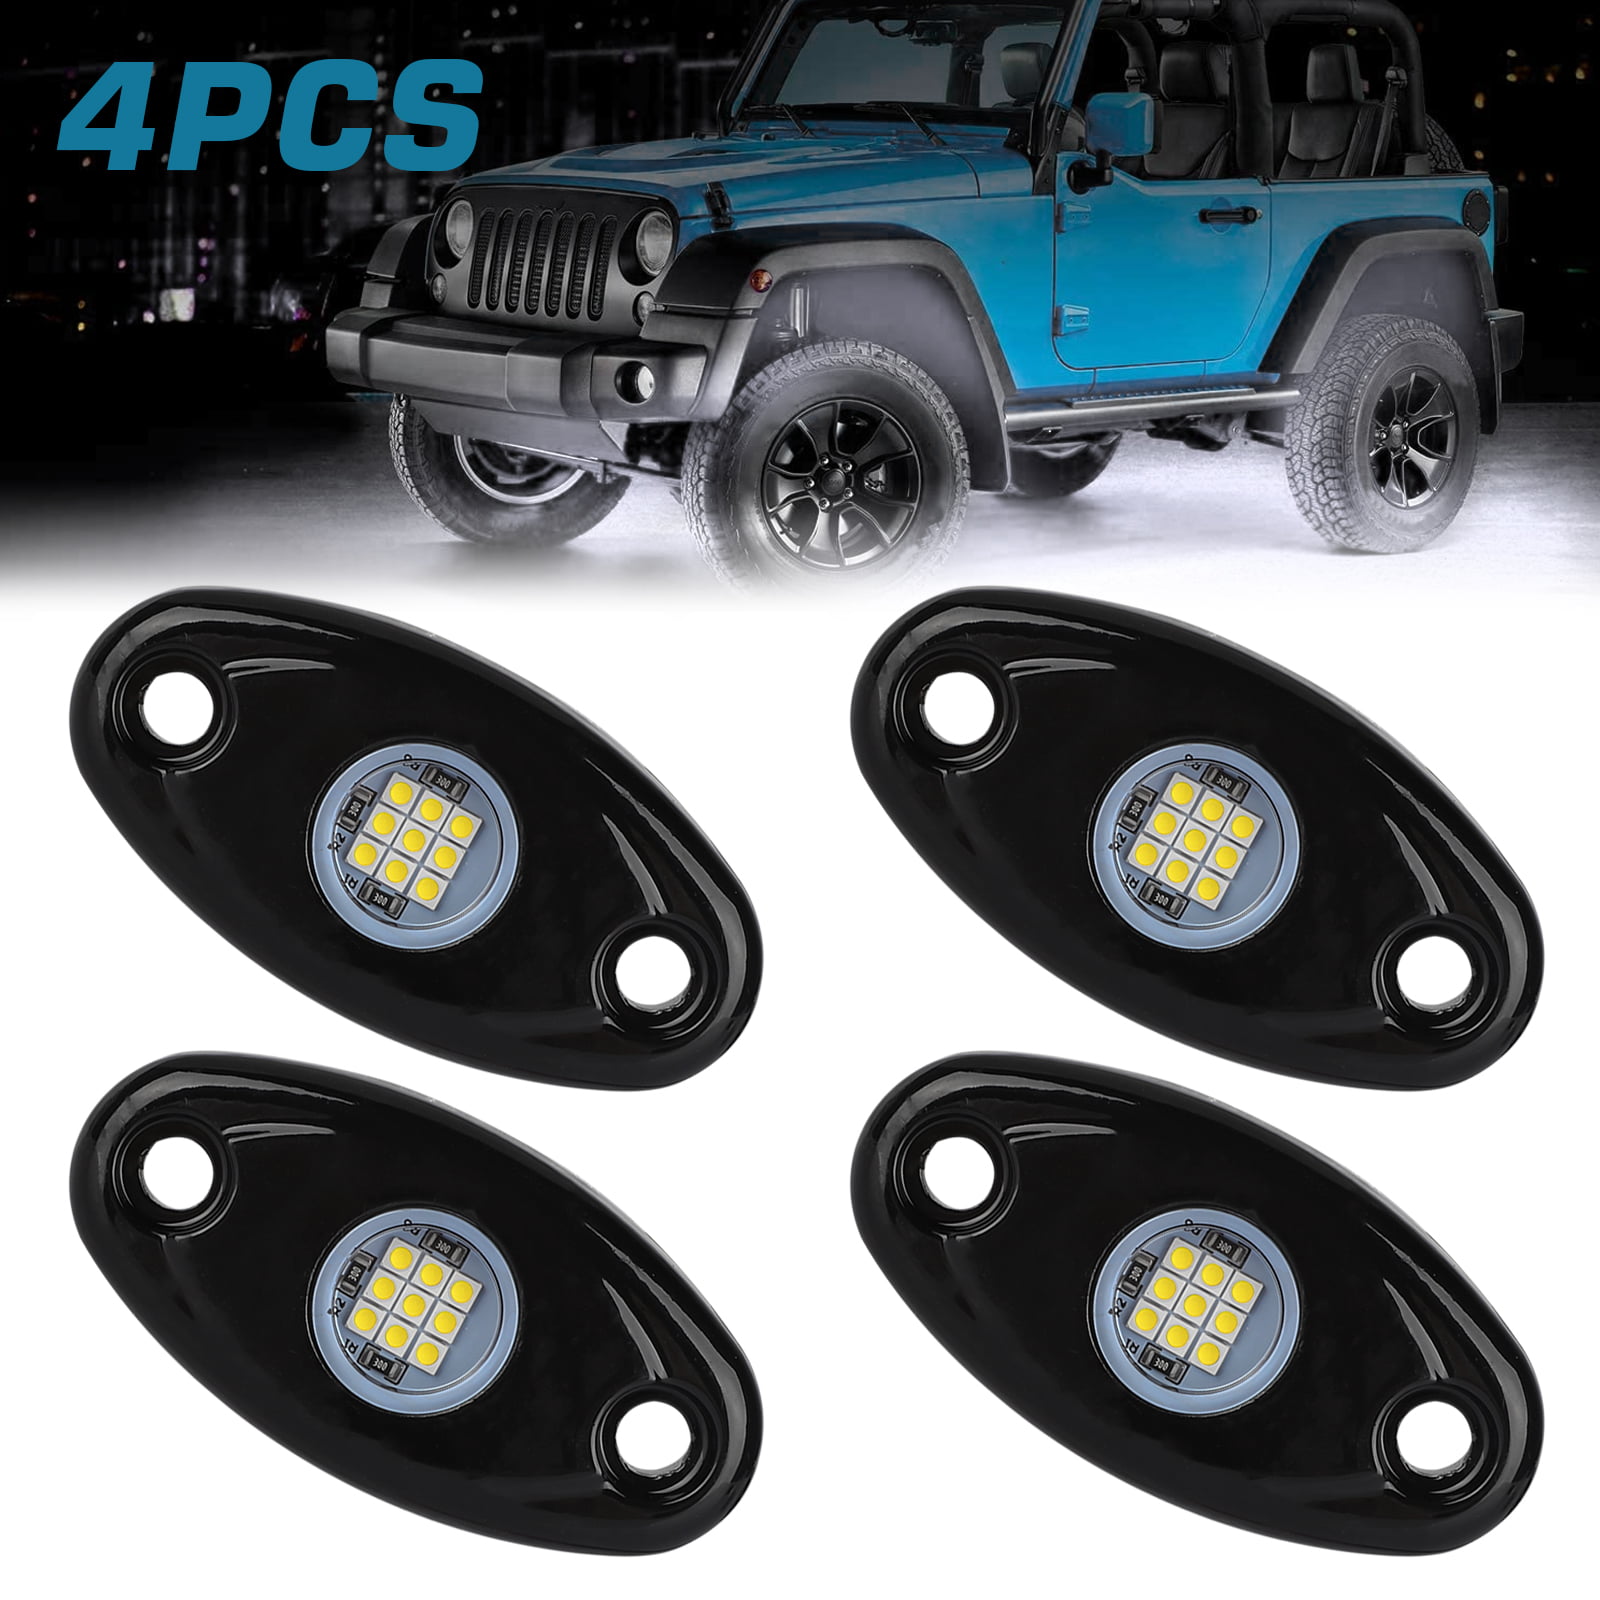 Pack of 2,Blue LEDMIRCY LED Rock Lights Blue Kit for JEEP Off Road Truck ATV SUV Boat Car Auto High Power Underbody Glow Neon Trail Rig Lights Underglow Lights Waterproof Shockproof 